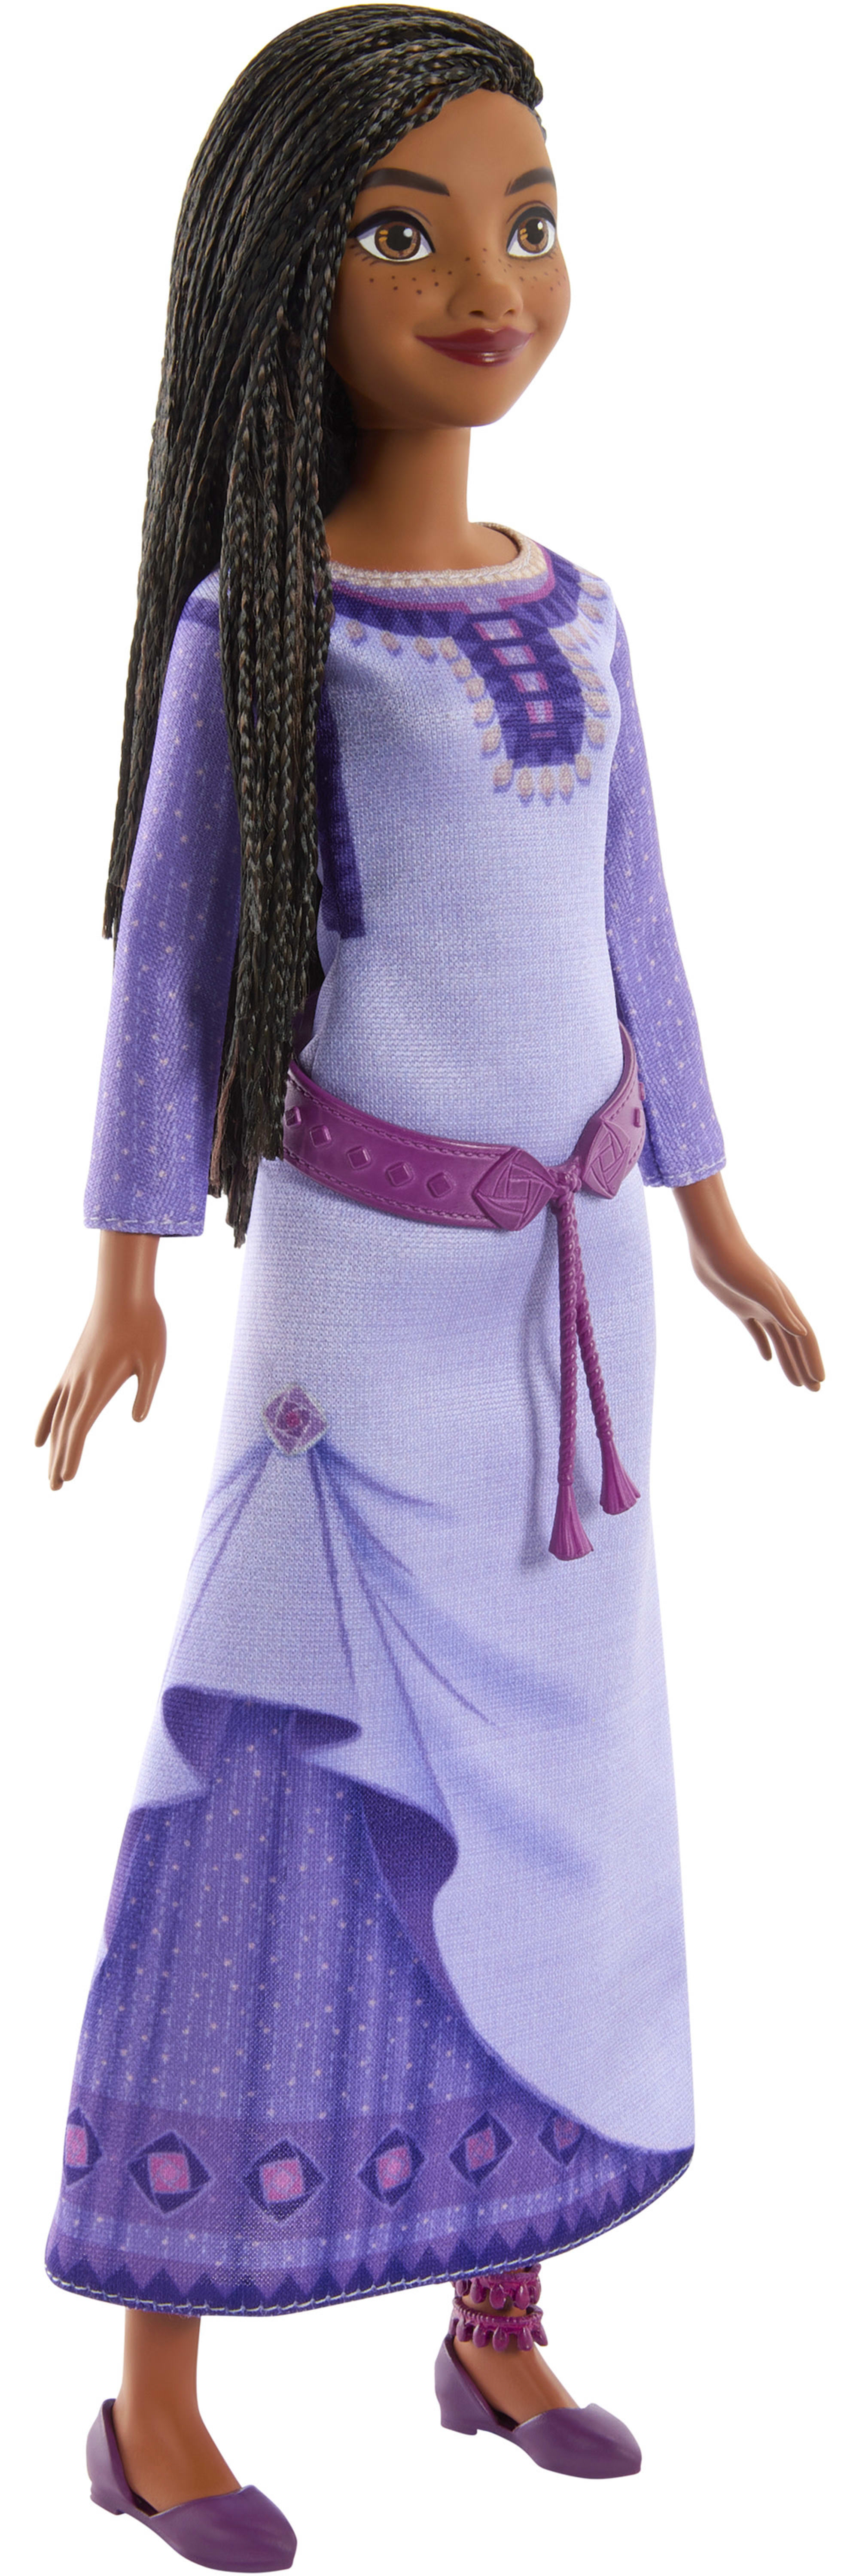 Disney's Wish Asha Of Rosas Posable Fashion Doll With Natural Hair,  Including Removable Clothes, Shoes, And Accessories